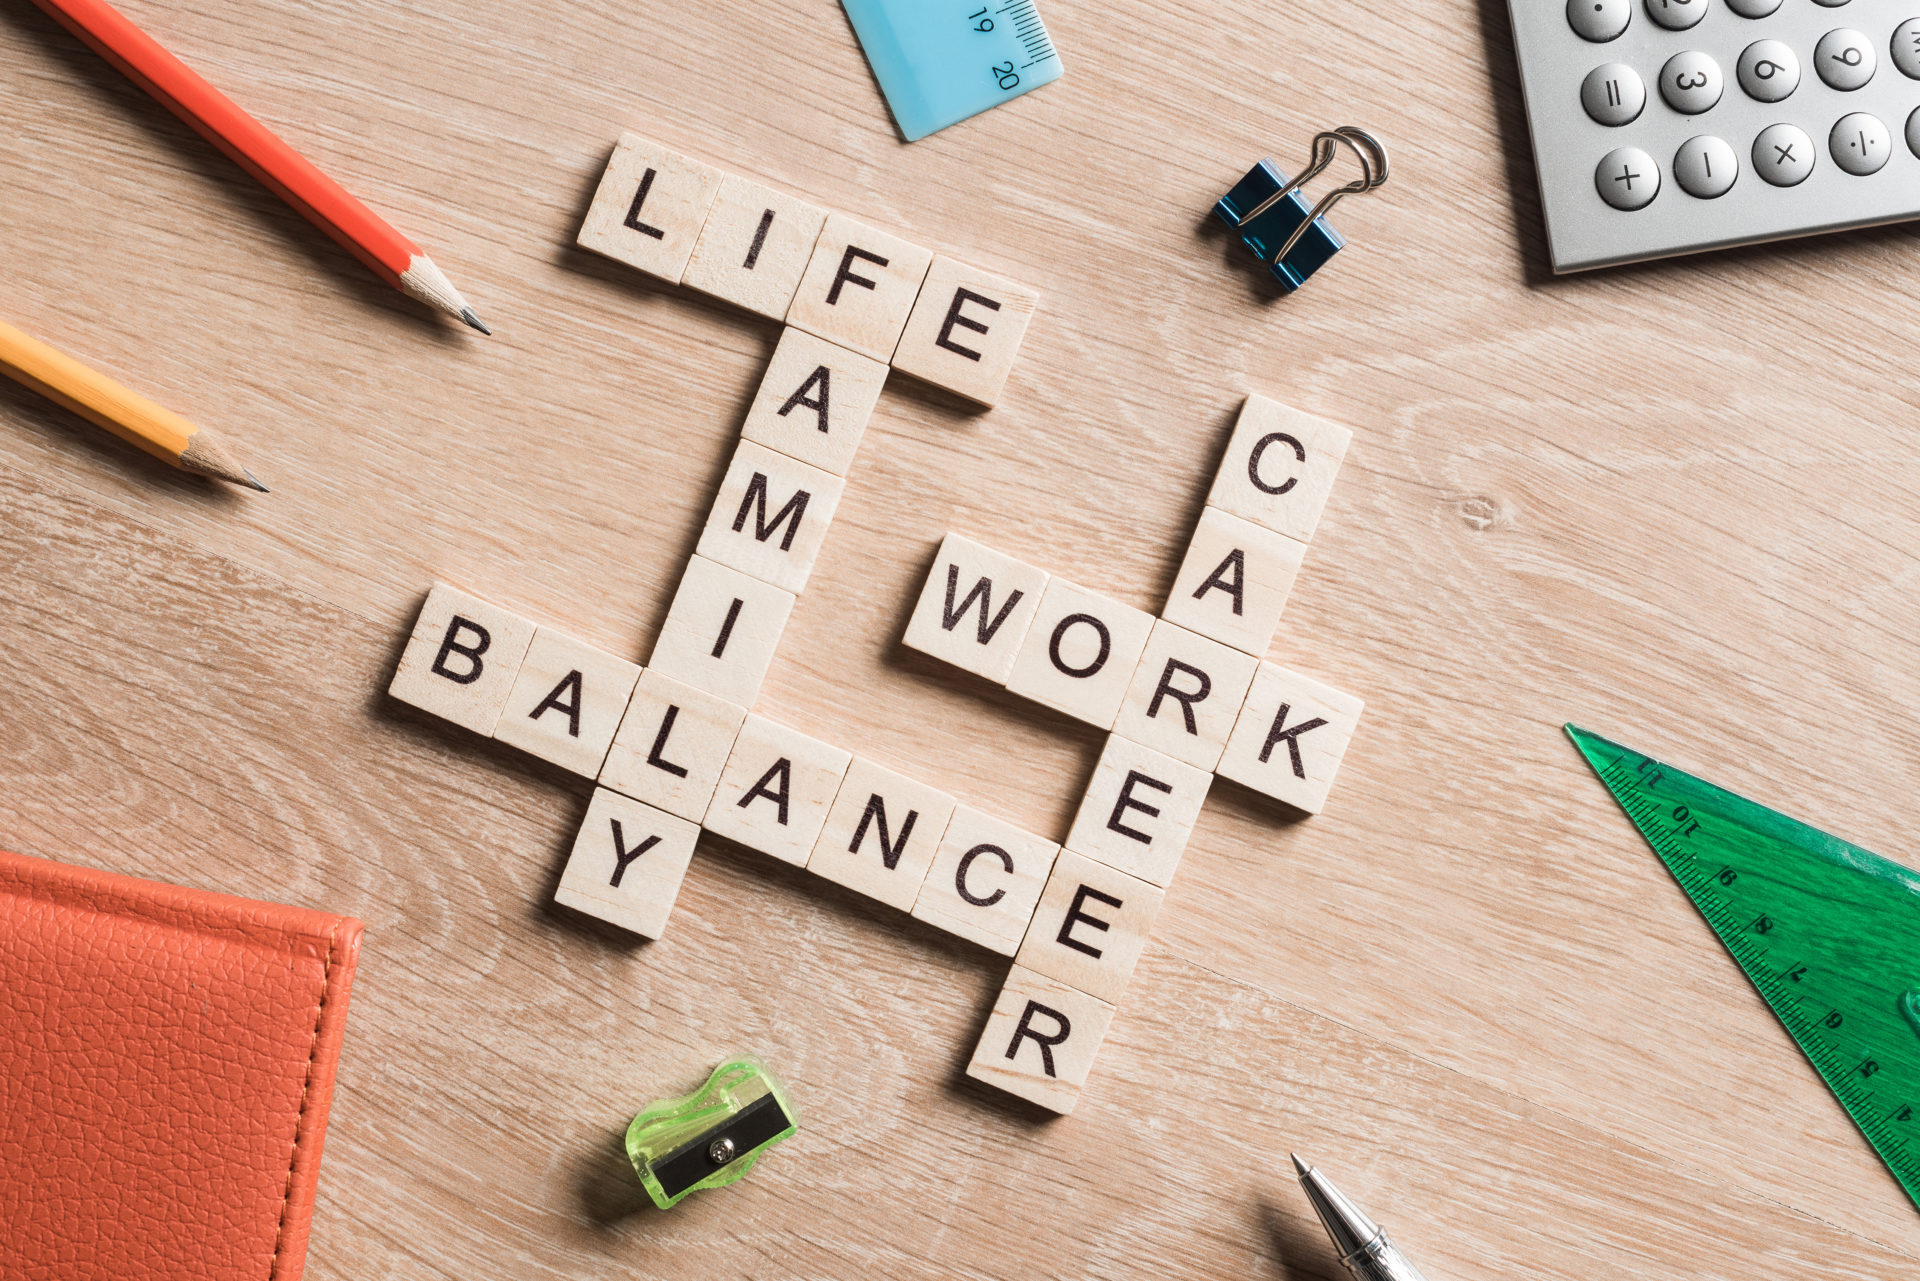 Tips for Coders to Achieve Work-Life Balance